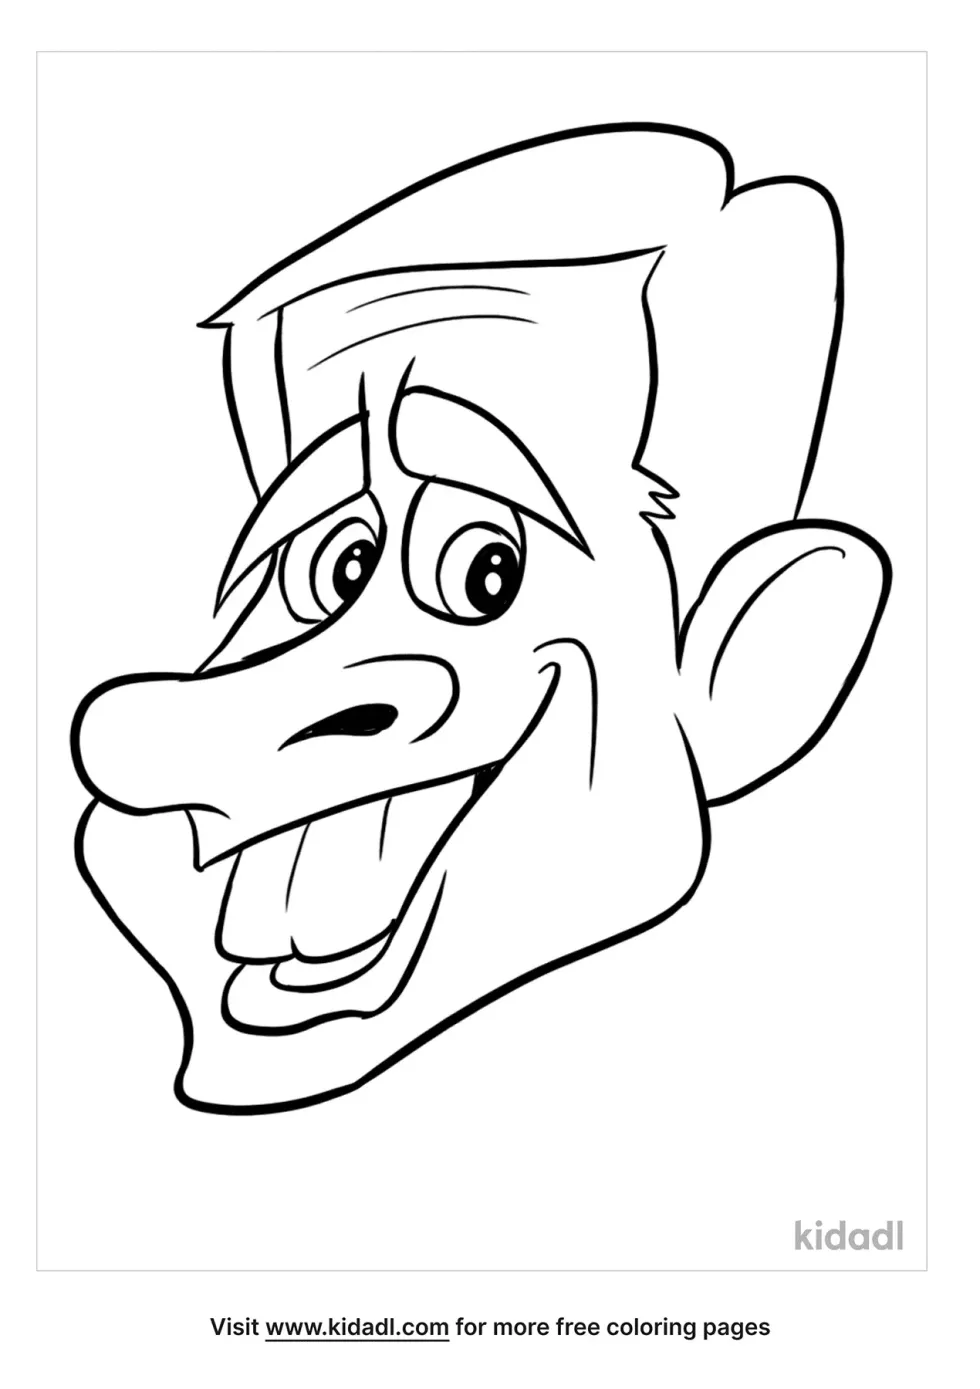 Steve Carell Coloring Page